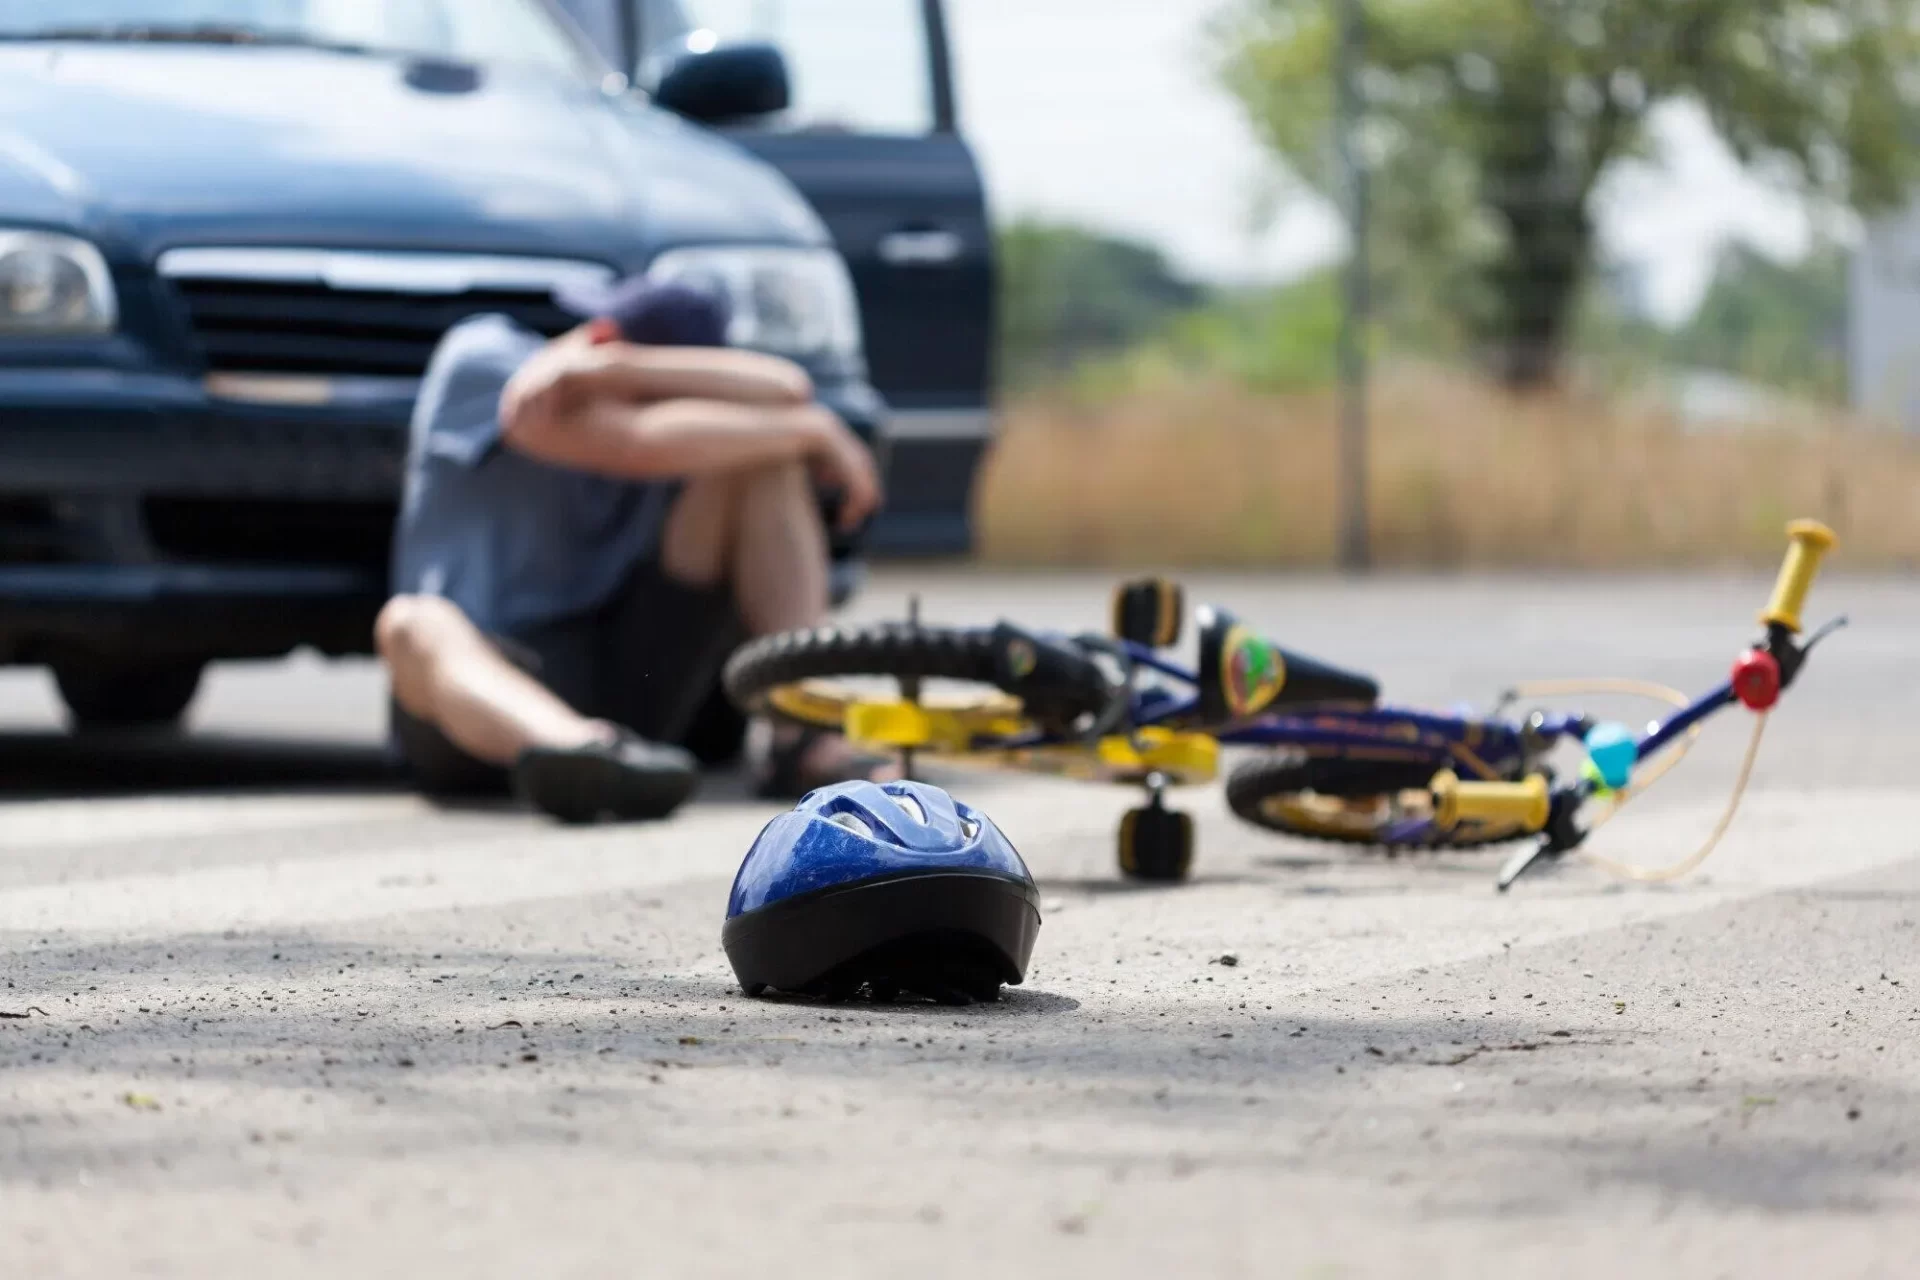 Know Your Rights in Exploring Legal Options After a Bike Wreck